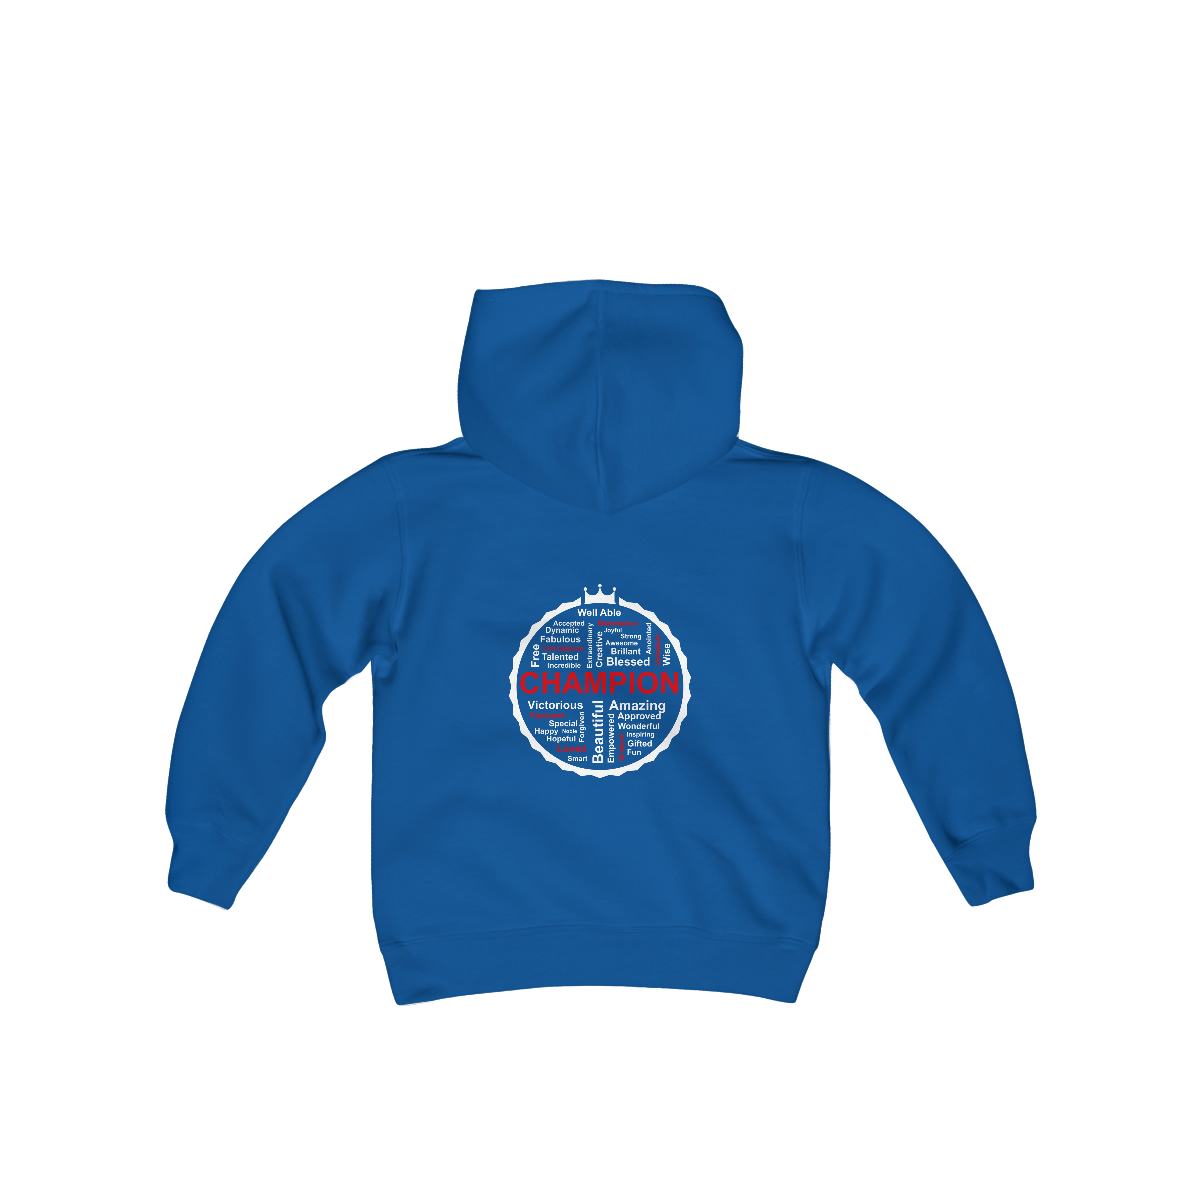 CHAMPION Kids Hoodie - Champions Needs Club Special Ministry